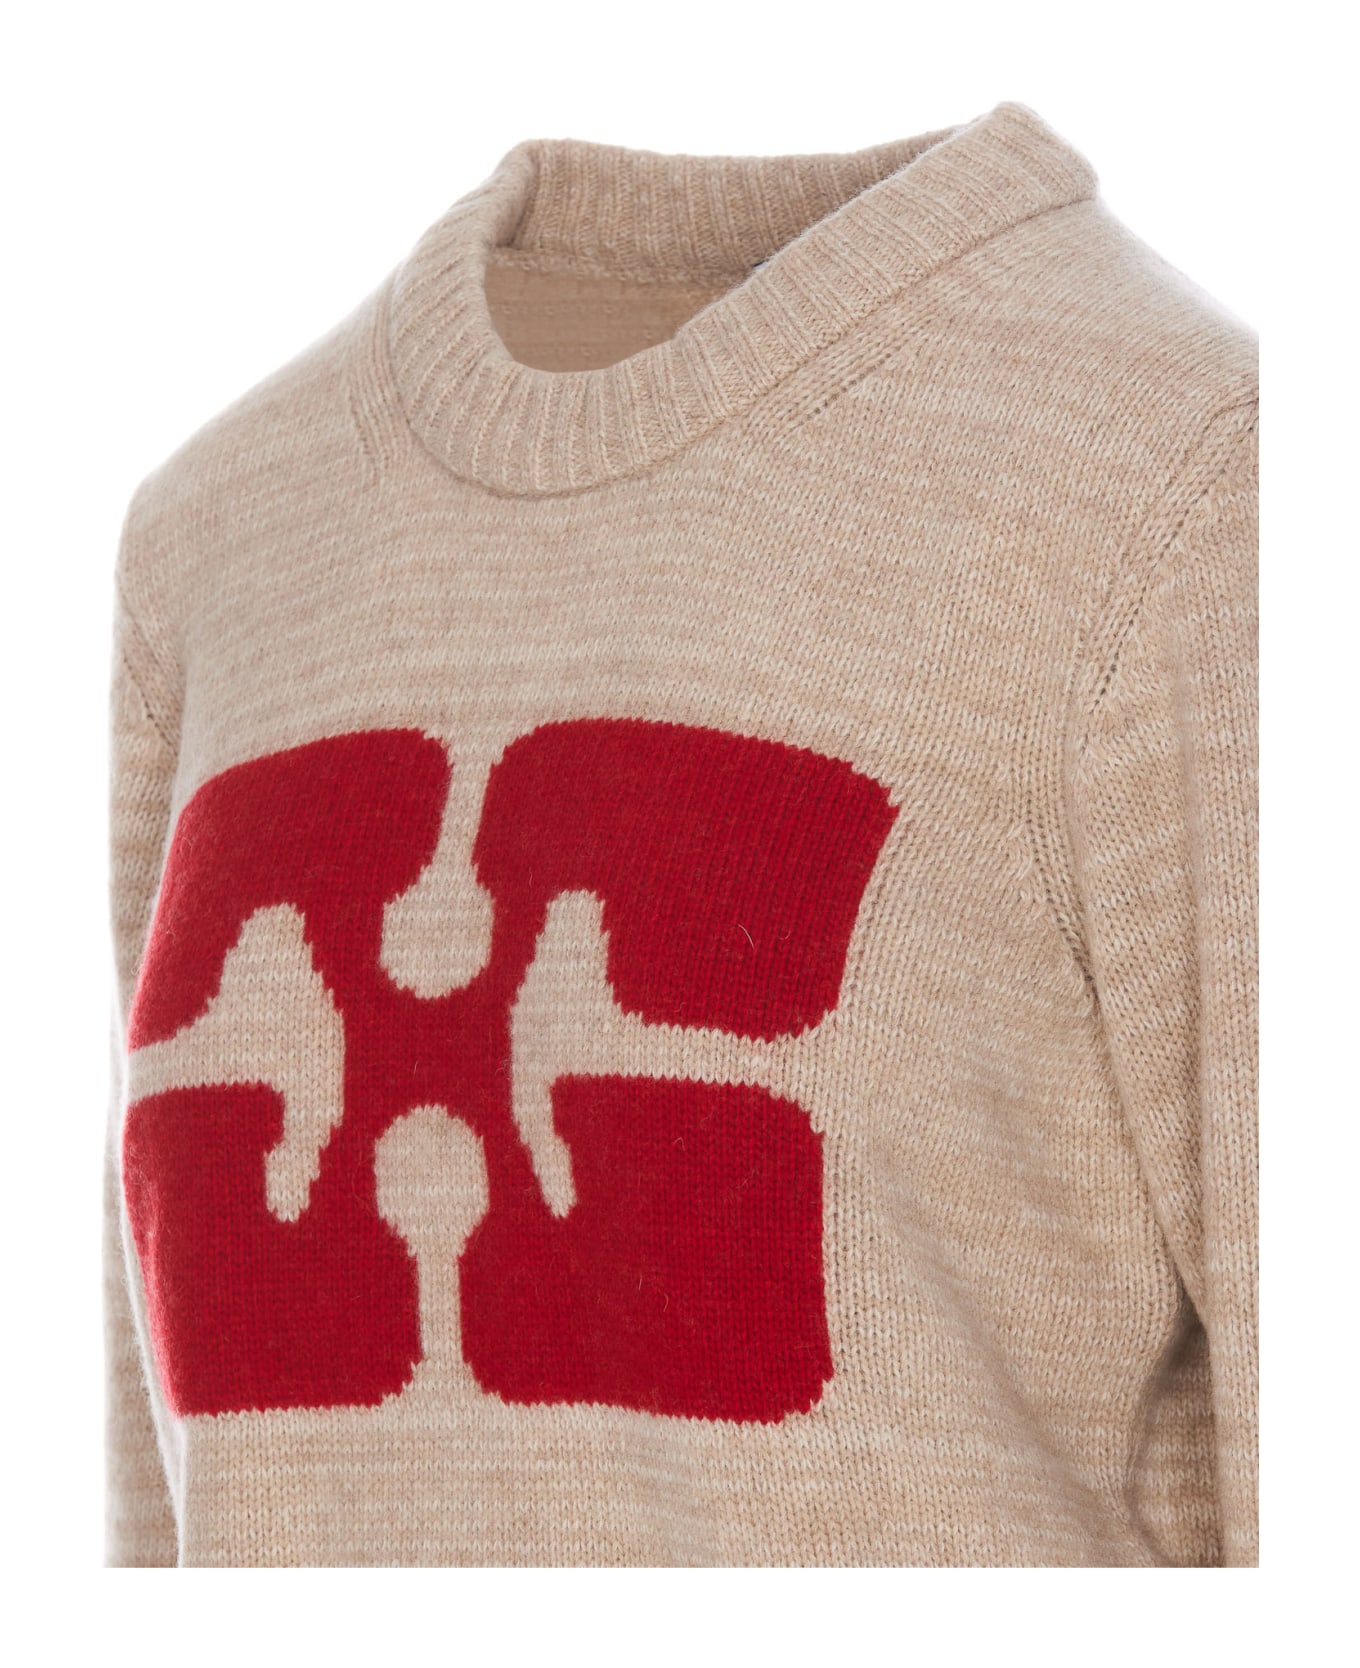 Ganni Graphic Butterfly Sweater - Pale Khaki